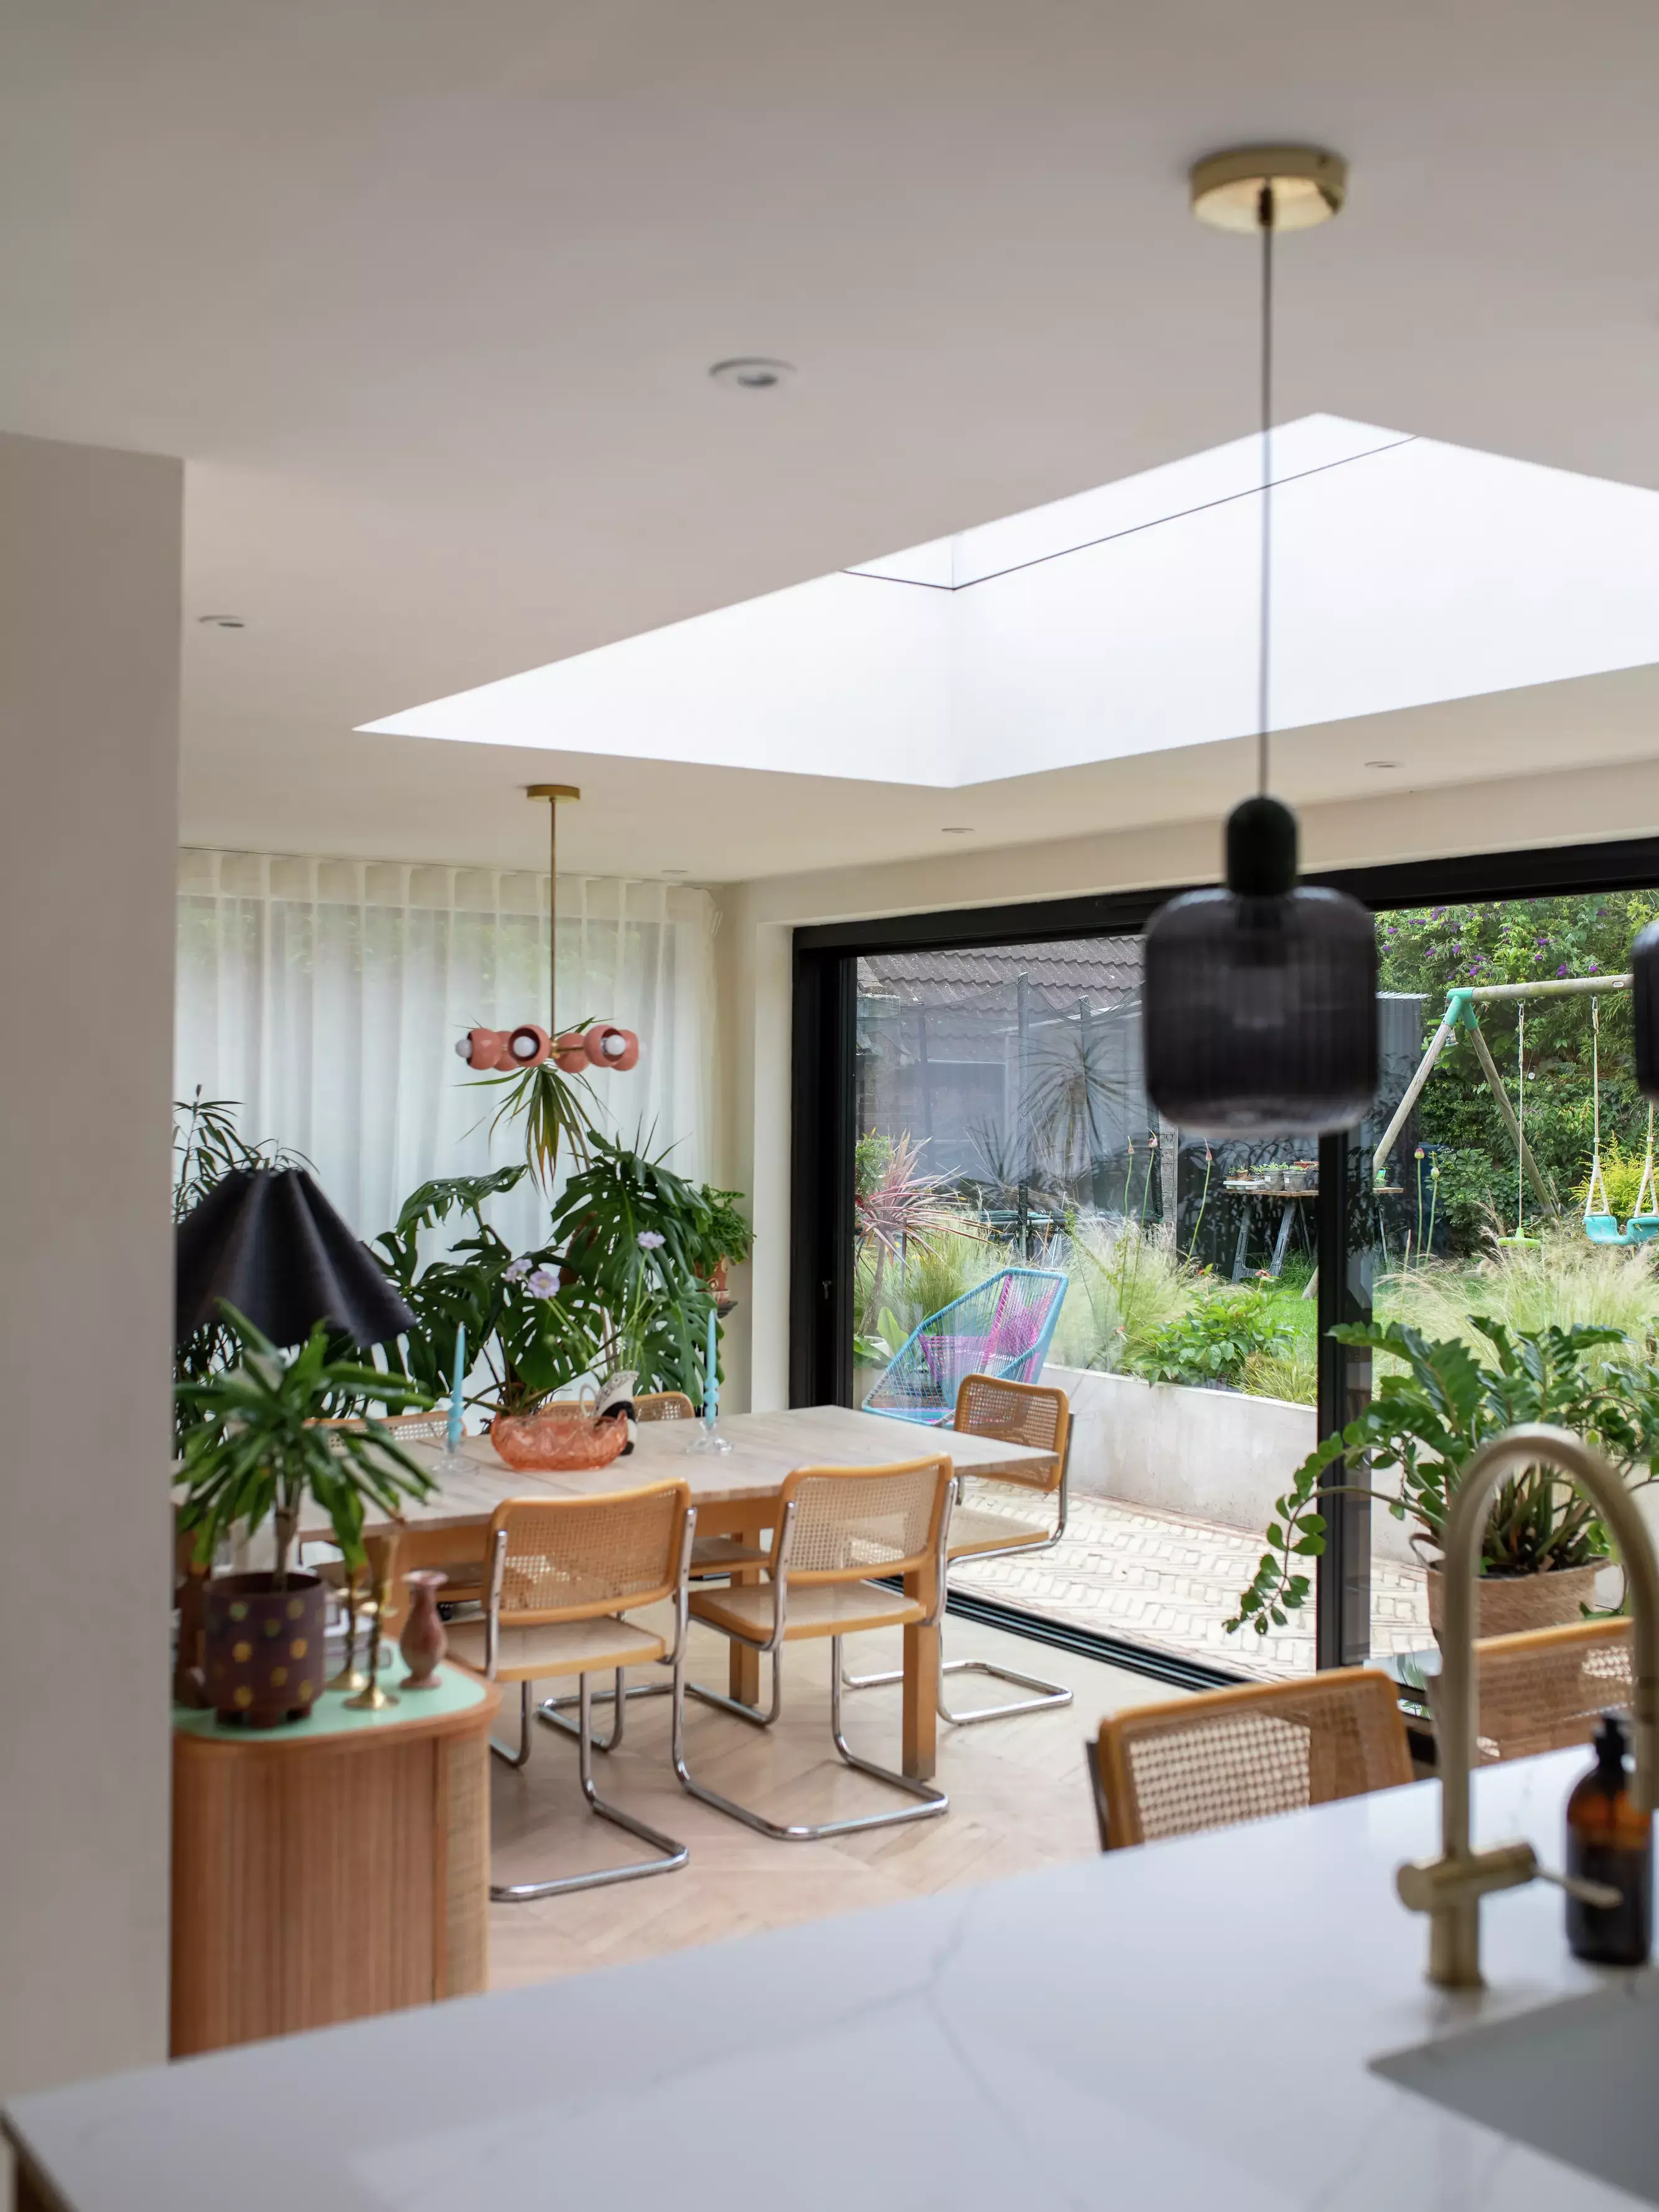 Modern dining room with natural light from VELUX roof window and garden view.